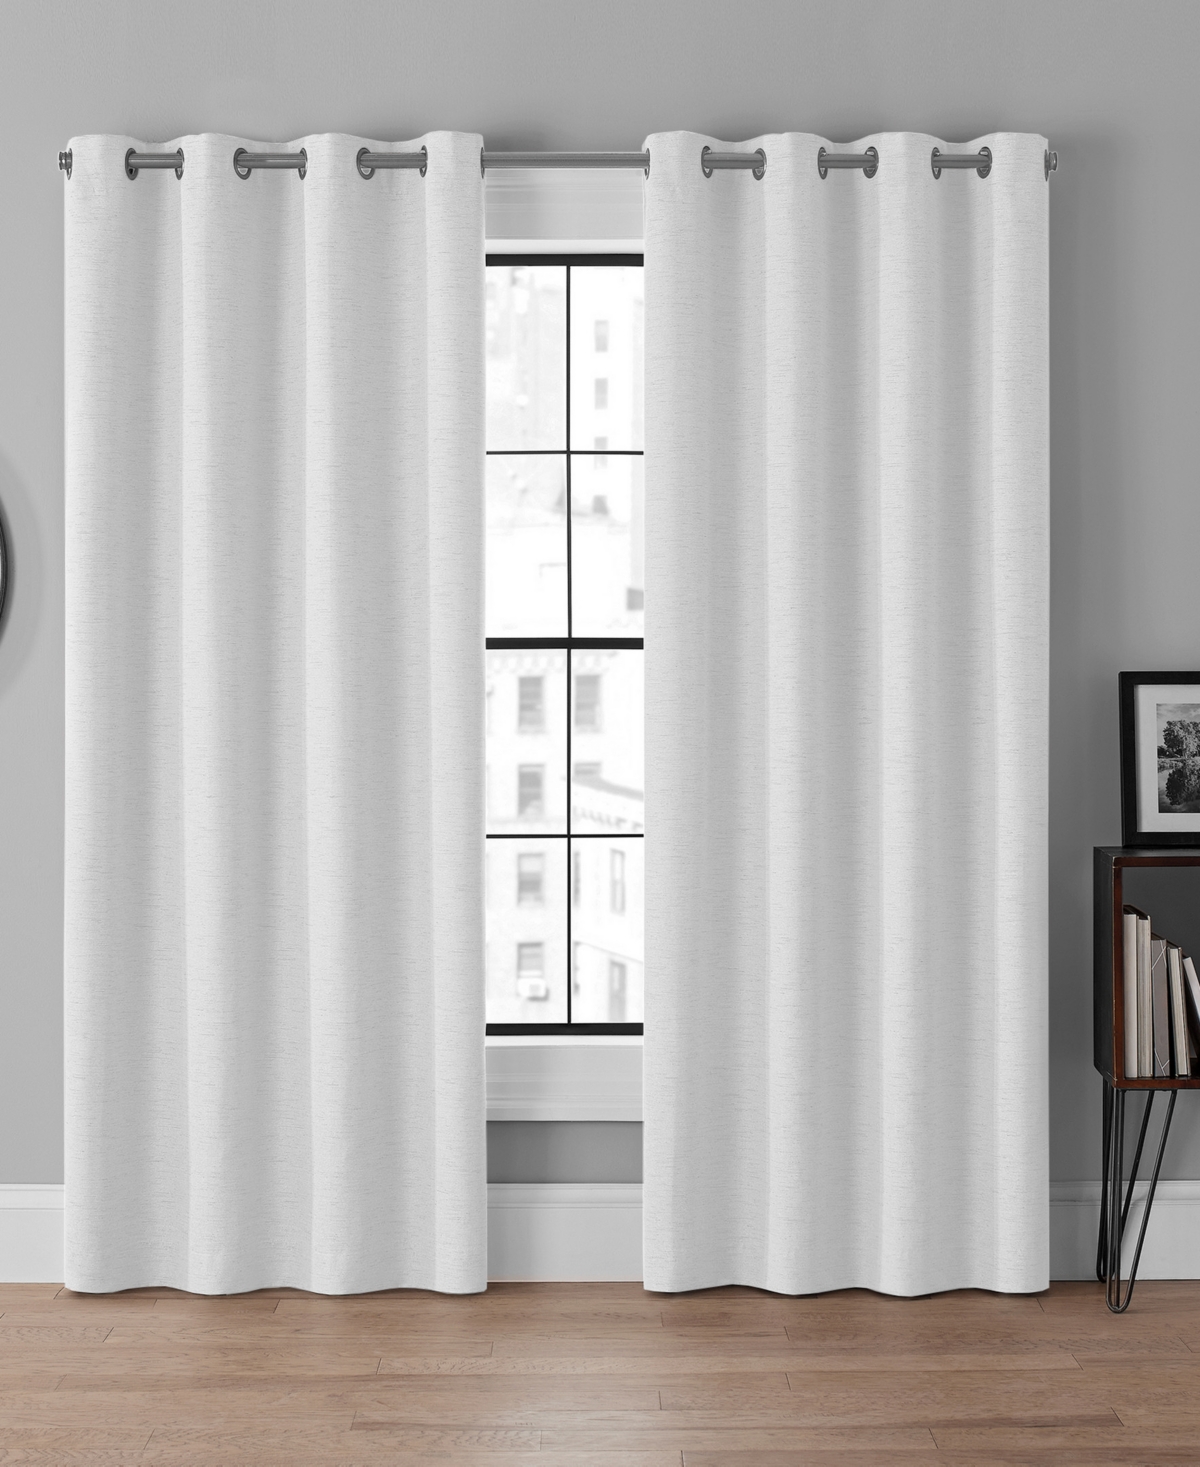 Eclipse Lawson Arm Hammer Odor Neutralizing Blackout Grommet Curtain Panel Collection In White